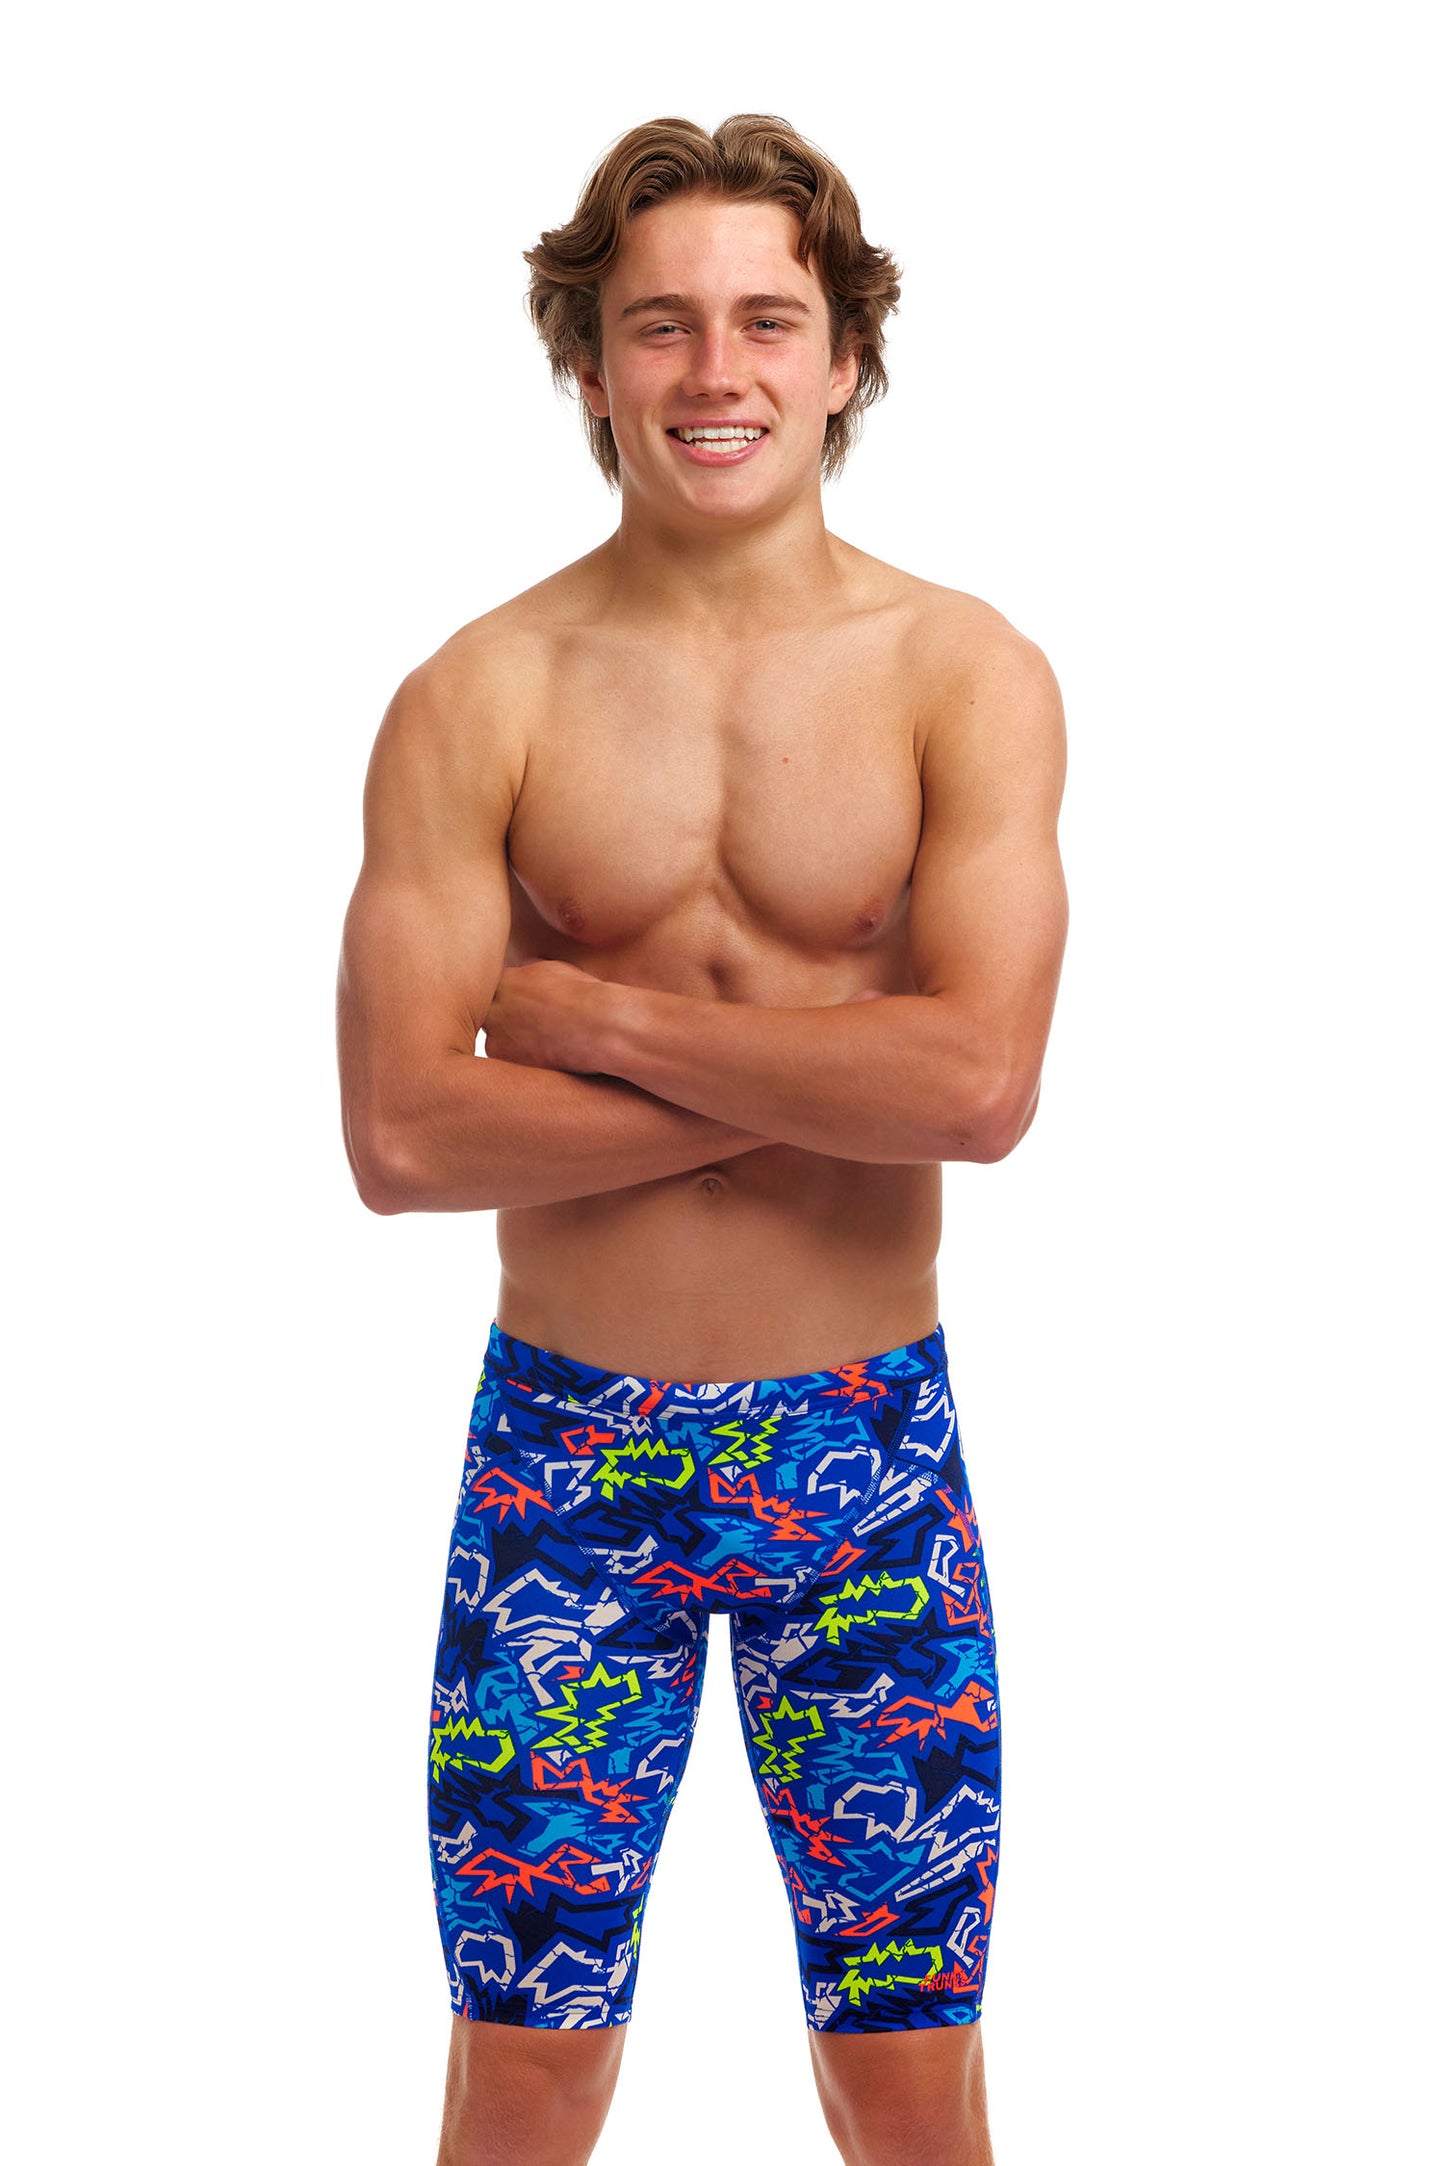 NEW! Funky Trunks Boys Eco Training Jammers Broken Hearts